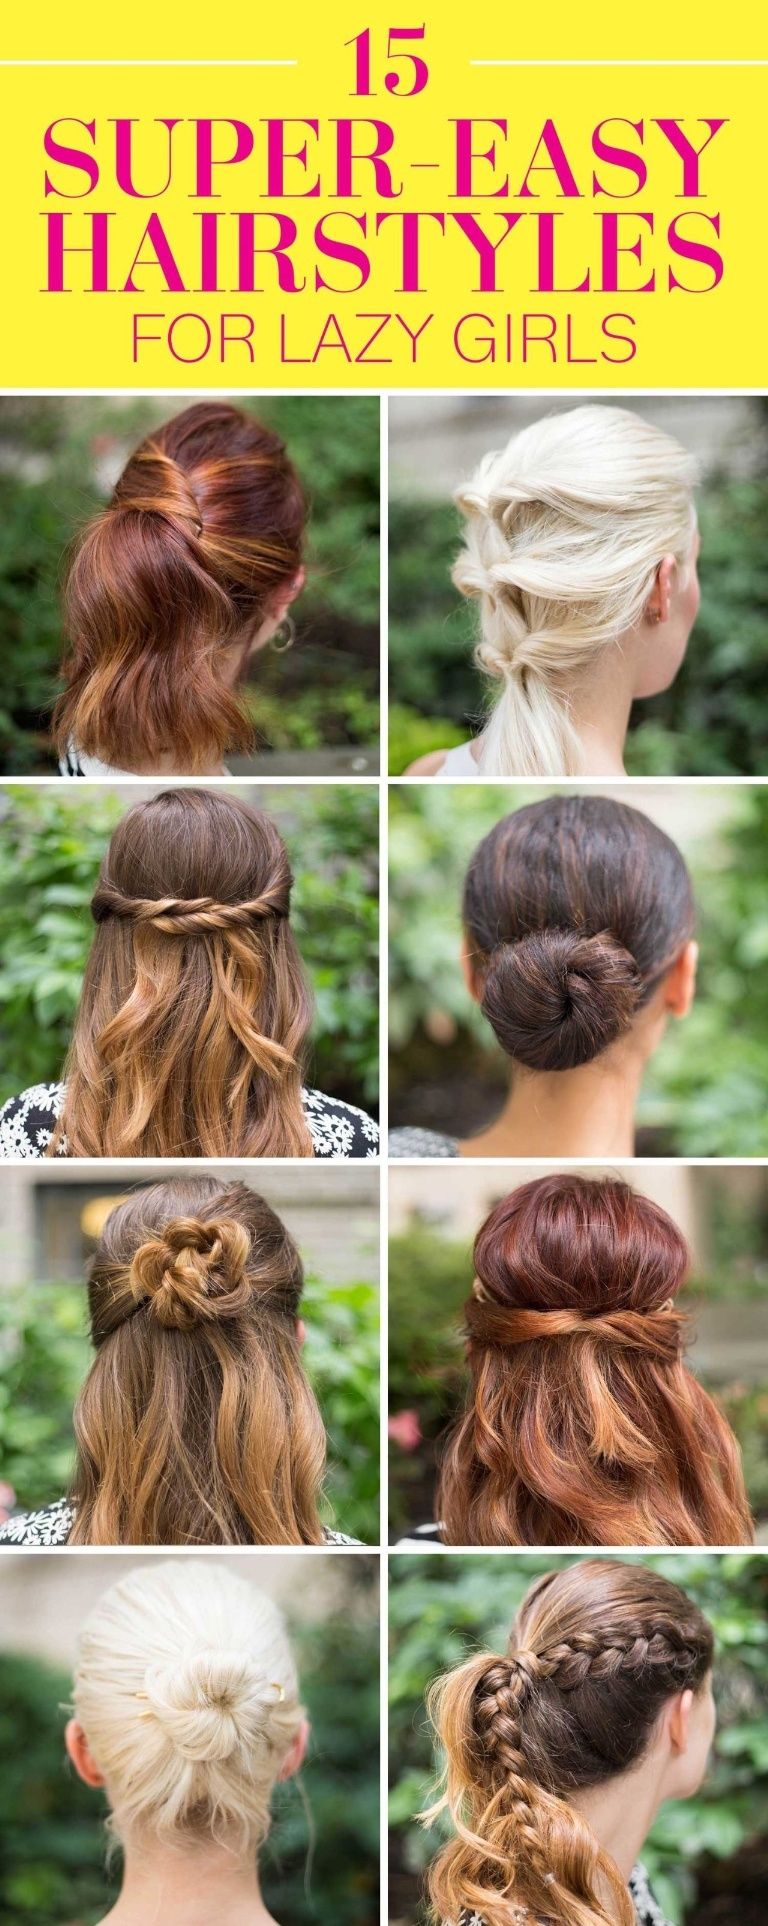 Easy lazy girl hairstyles